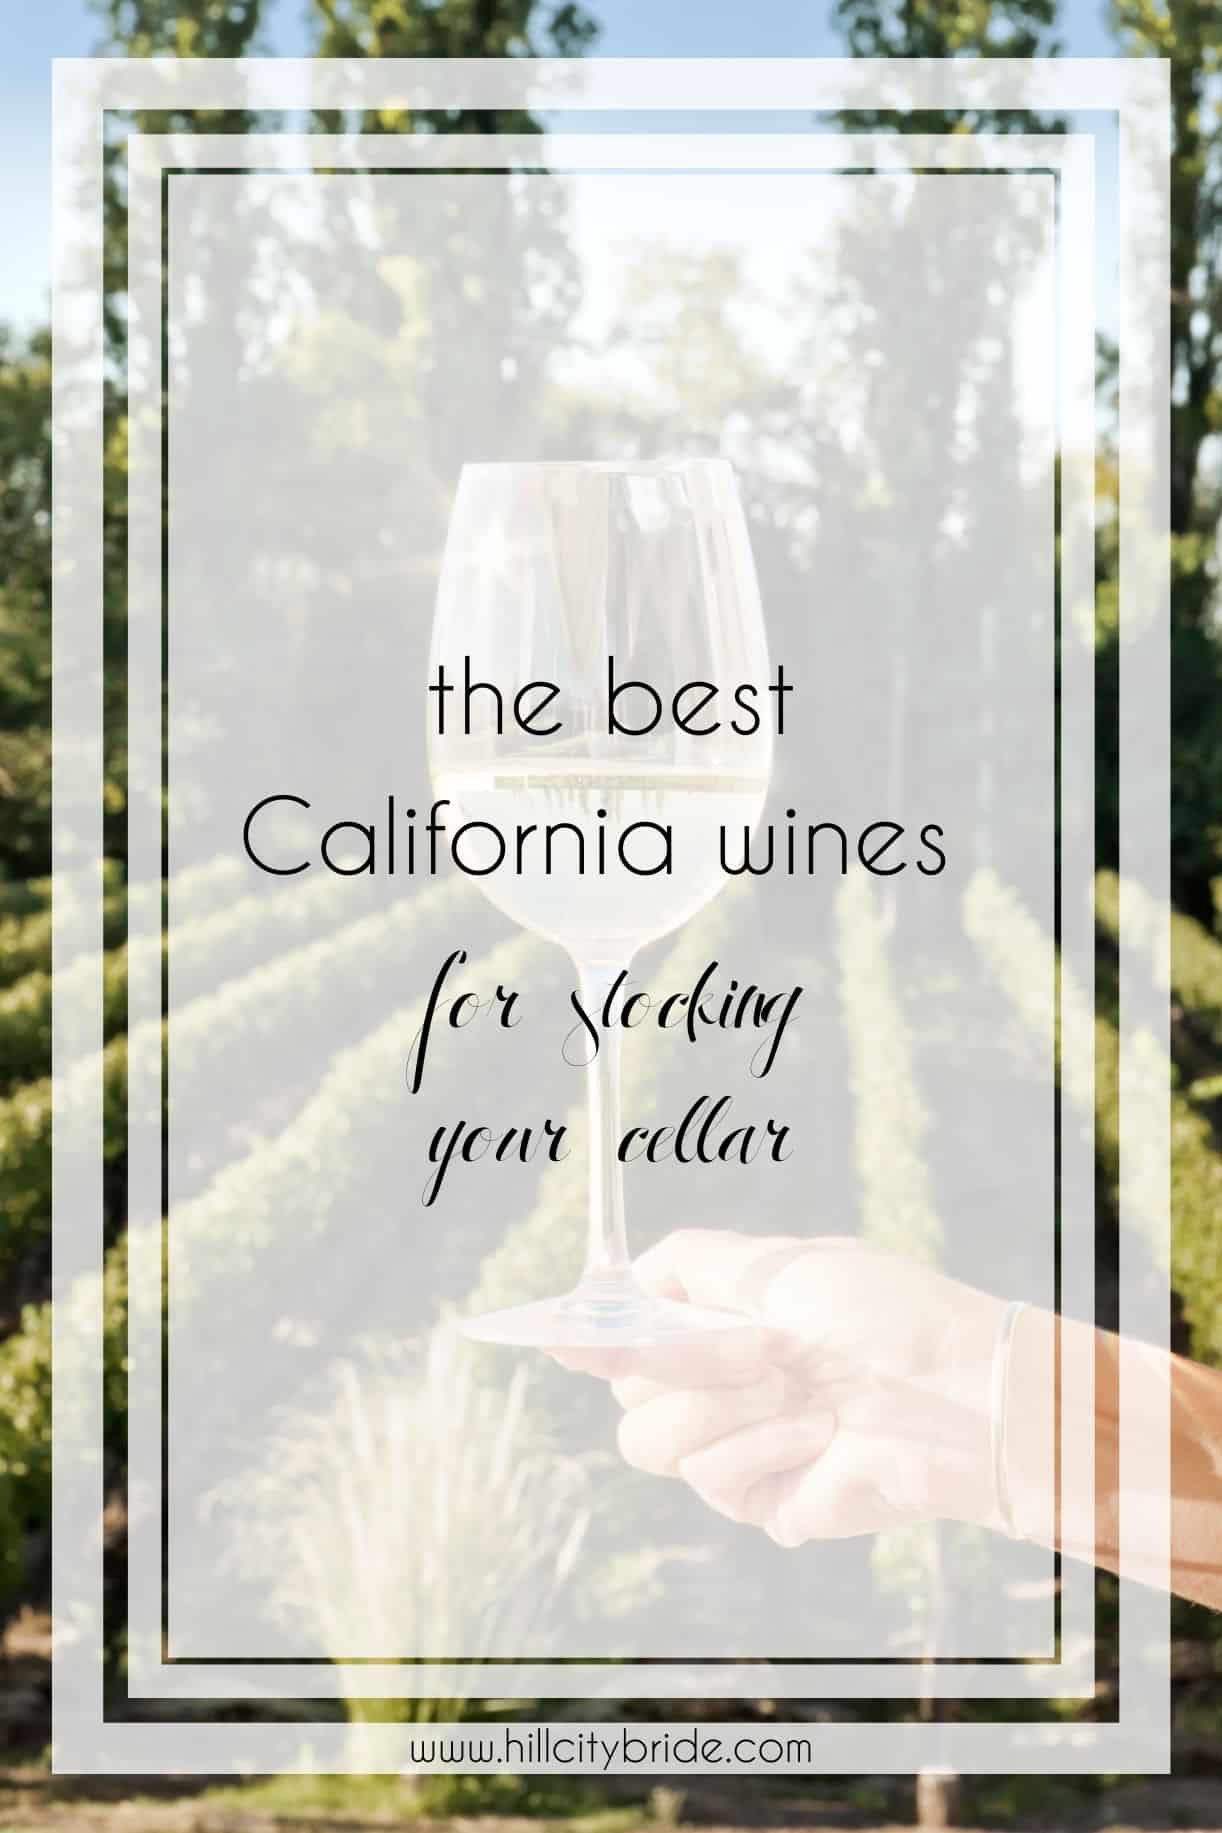 The 10 Best California Wines for Stocking Your Cellar